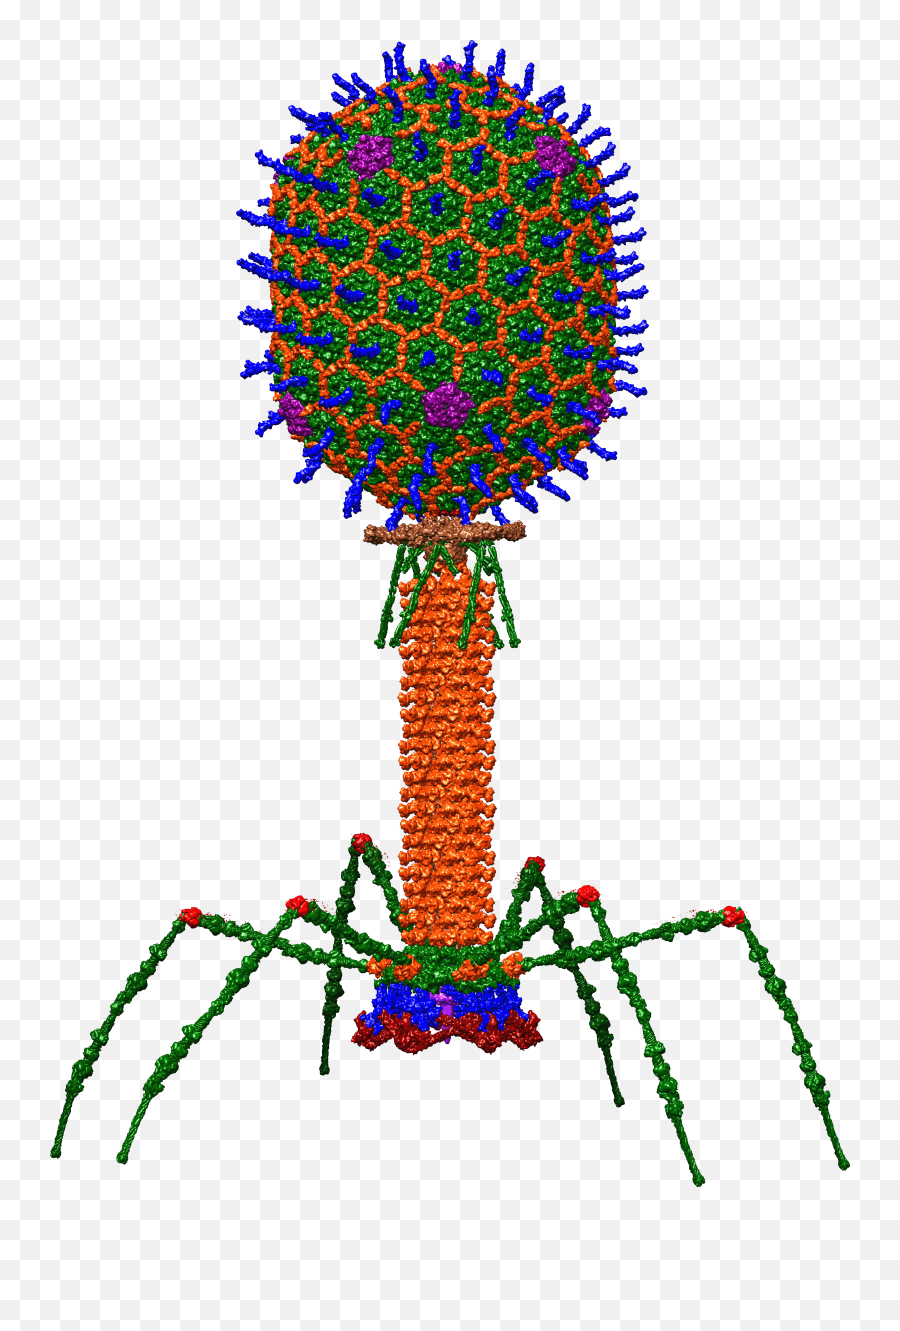 Bacteriophage - T4 Bacteriophage Emoji,Flip This Table Wikipedia Emoticon